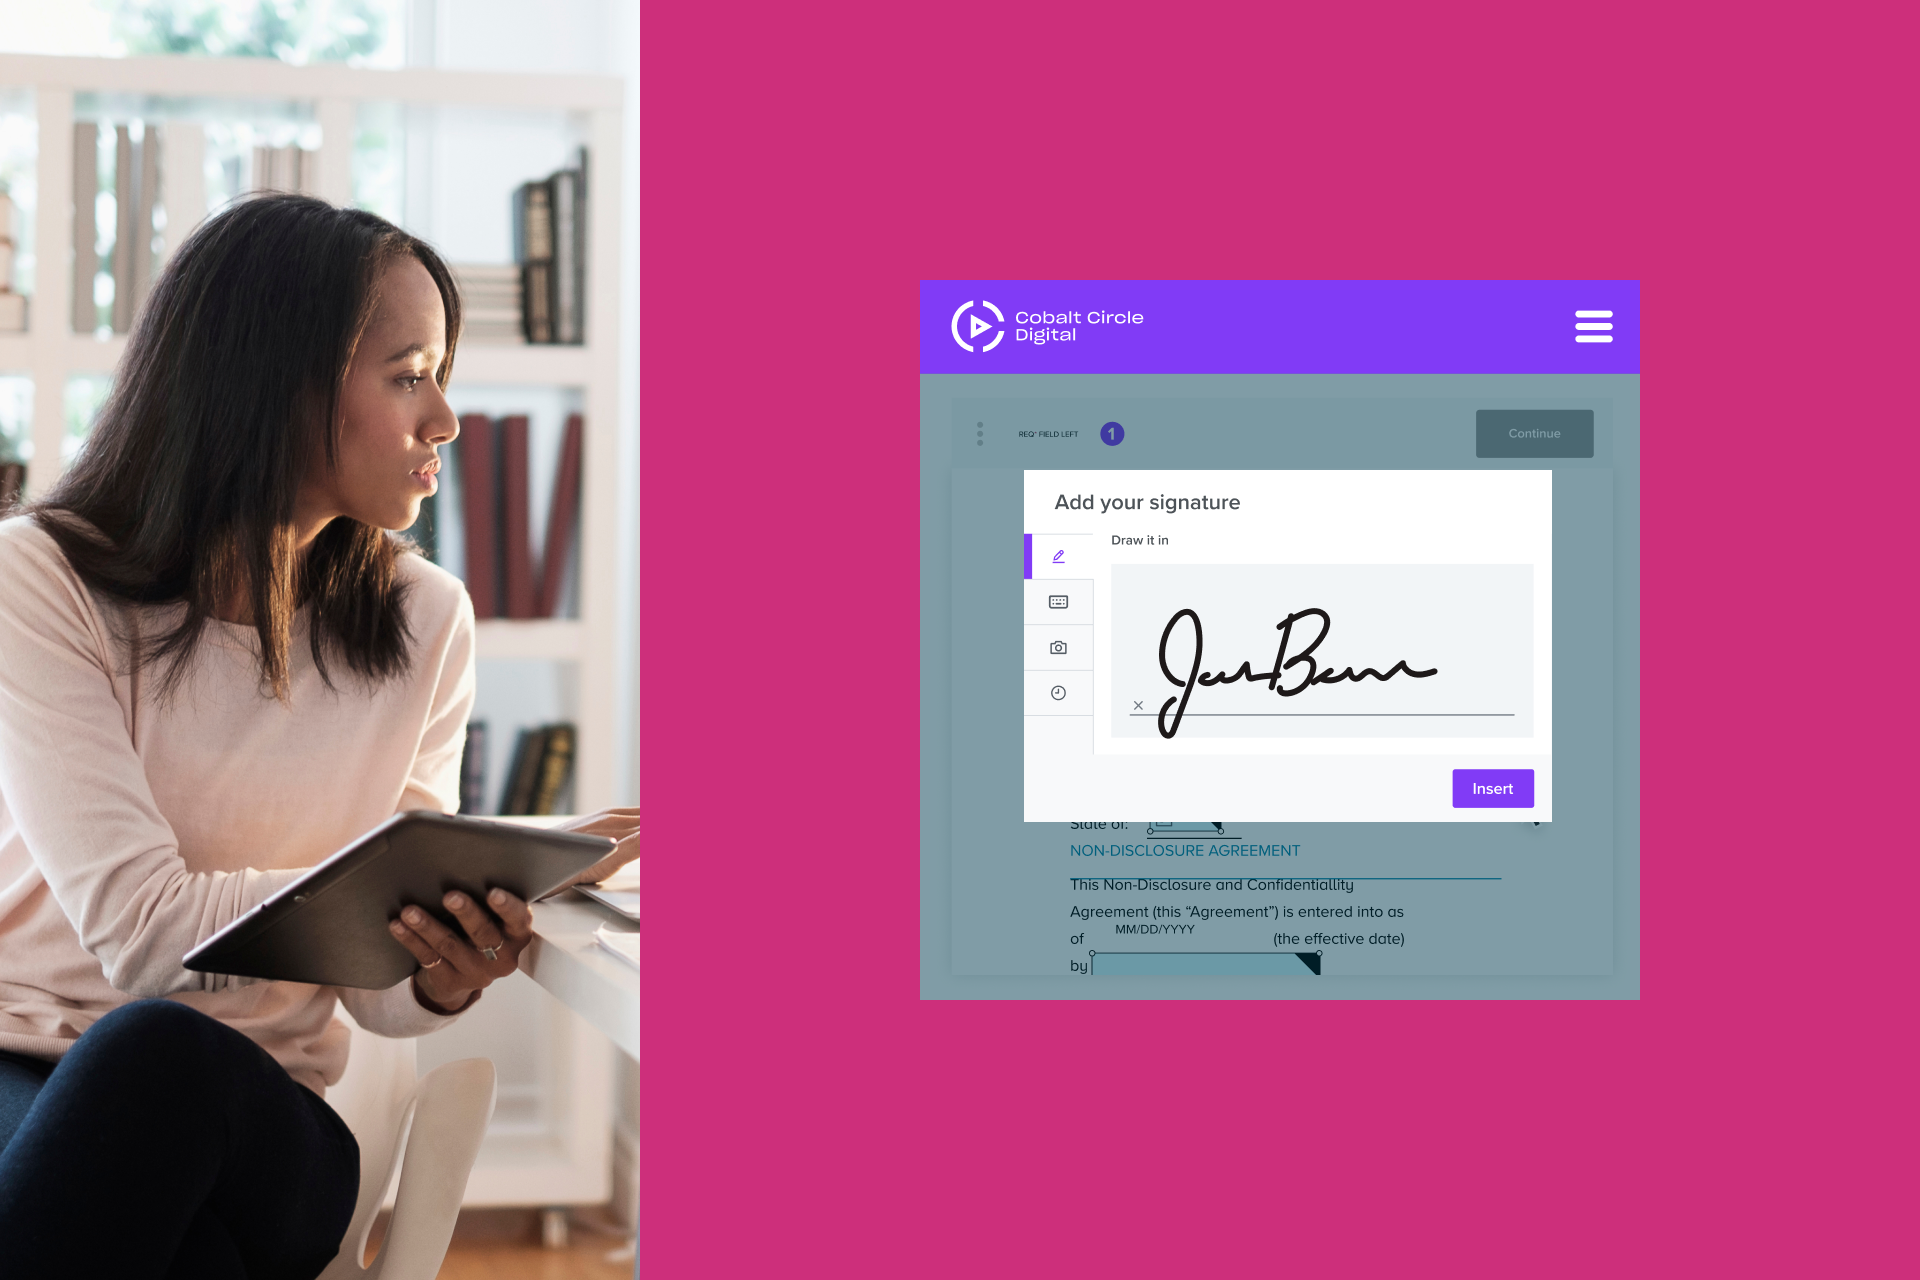 An example of an e-signature